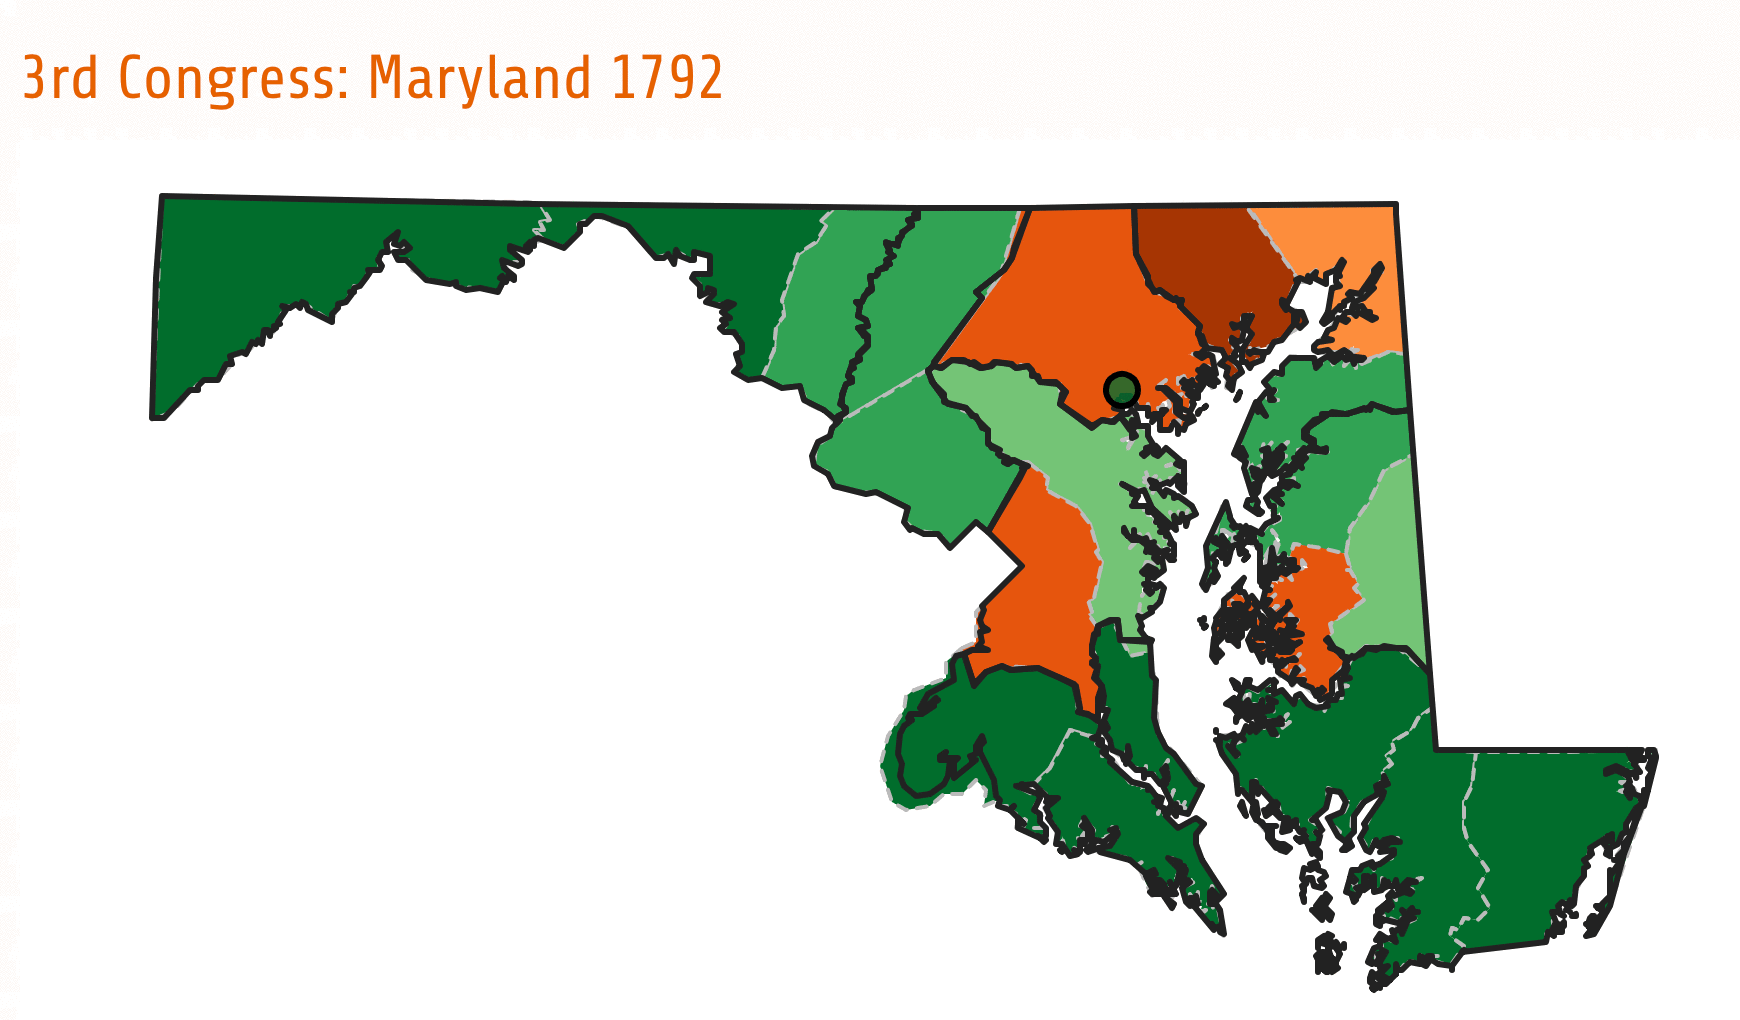 The regional divisions established during Maryland’s second Congressional election formed the basis for voting patterns from 1792-1820. Generally, the counties in the Upper Chesapeake, who had supported the Chesapeake party, became a bastion of Democratic-Republican (purple) support. At the same time, counties in the southern part of the state, who had supported the Potomac party, gave consistent support to the Federalists (green). This allowed the Federalists to remain competitive in elections across the state of Maryland until 1824. Finally, in the middle and western parts of the state, voting was mixed and elections were often highly contested.